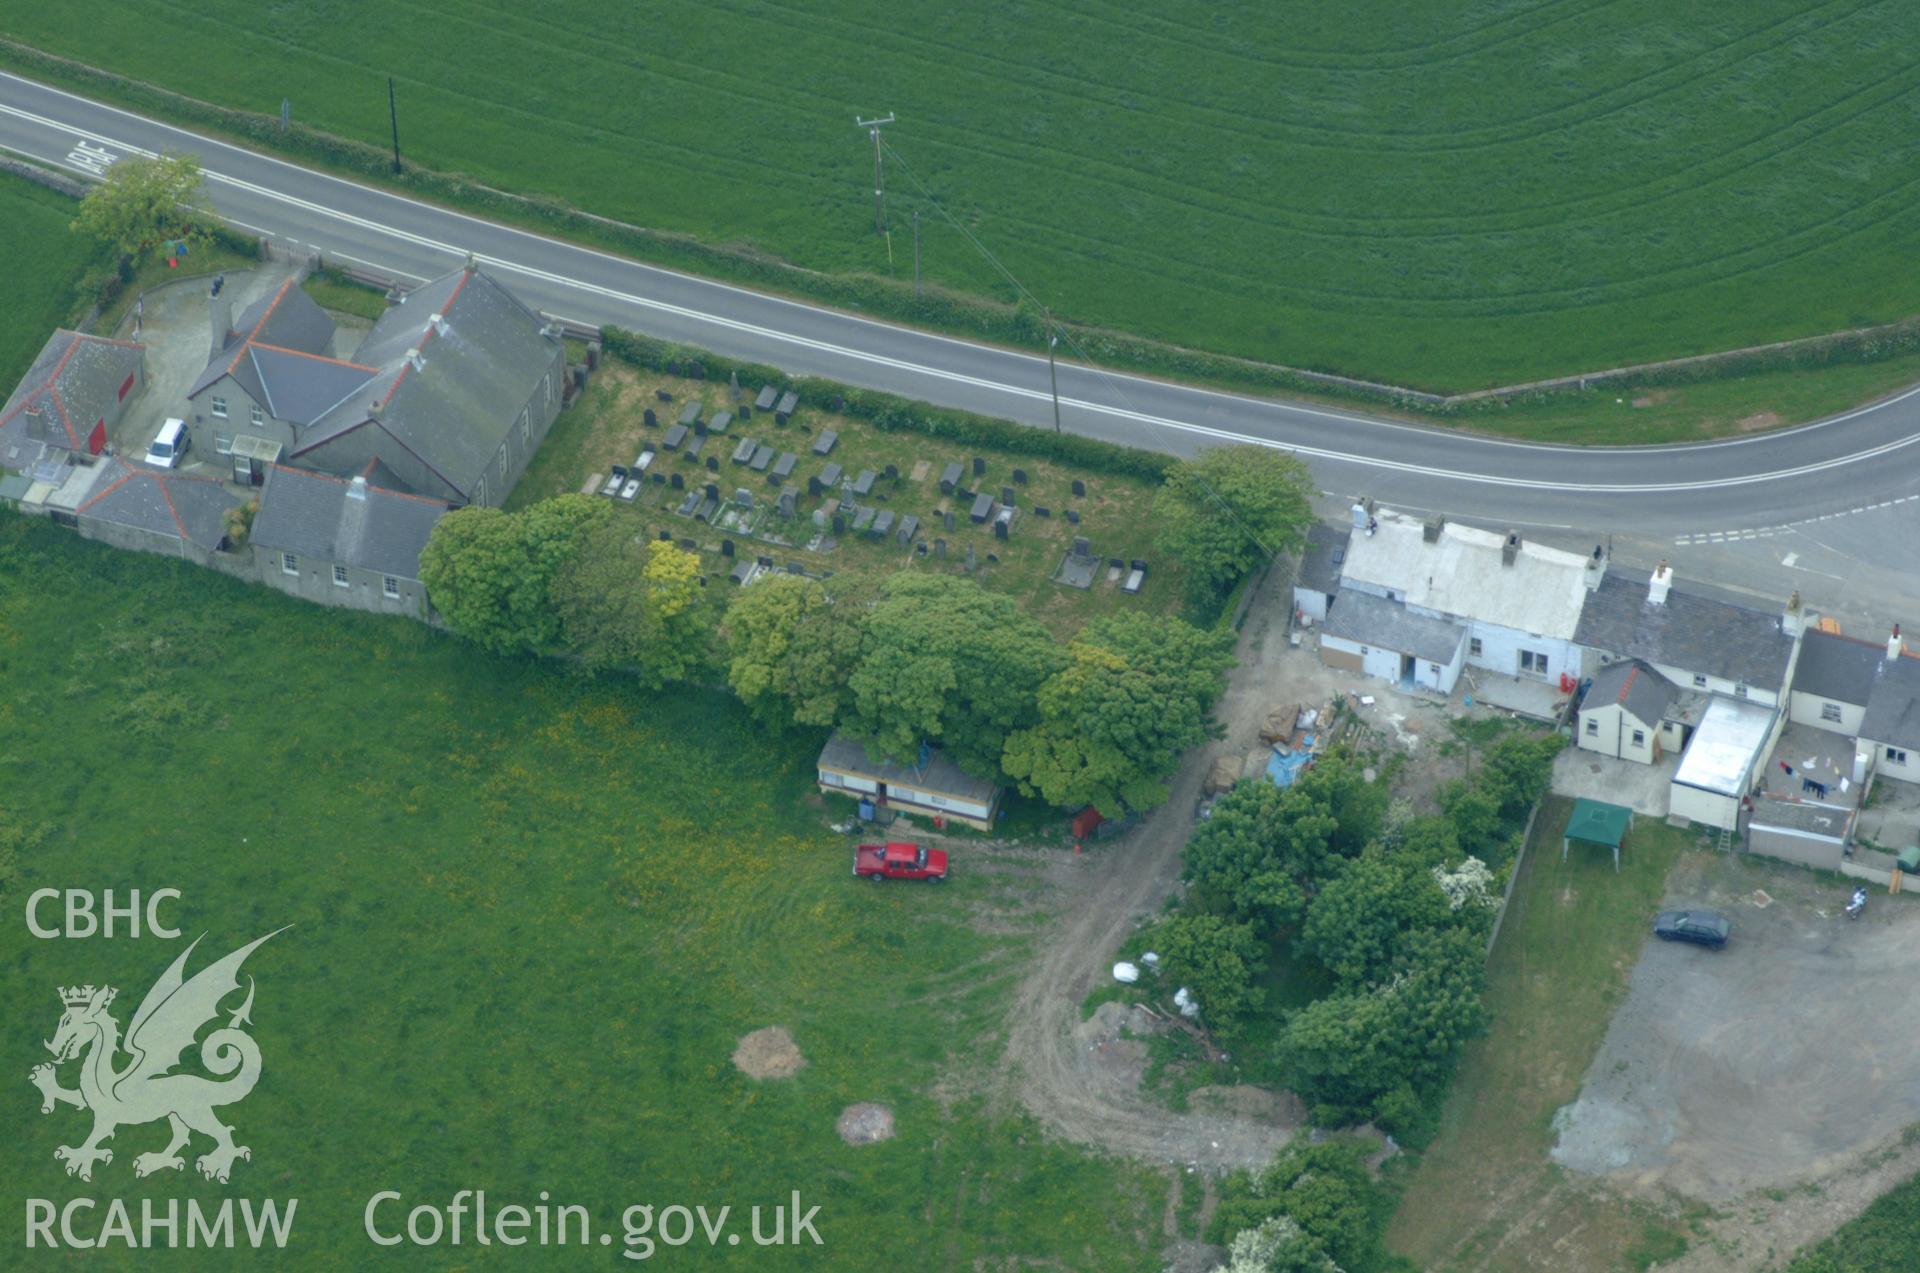 RCAHMW colour oblique aerial photograph of Soar Welsh Baptist Church, Llanfaethlu taken on 26/05/2004 by Toby Driver